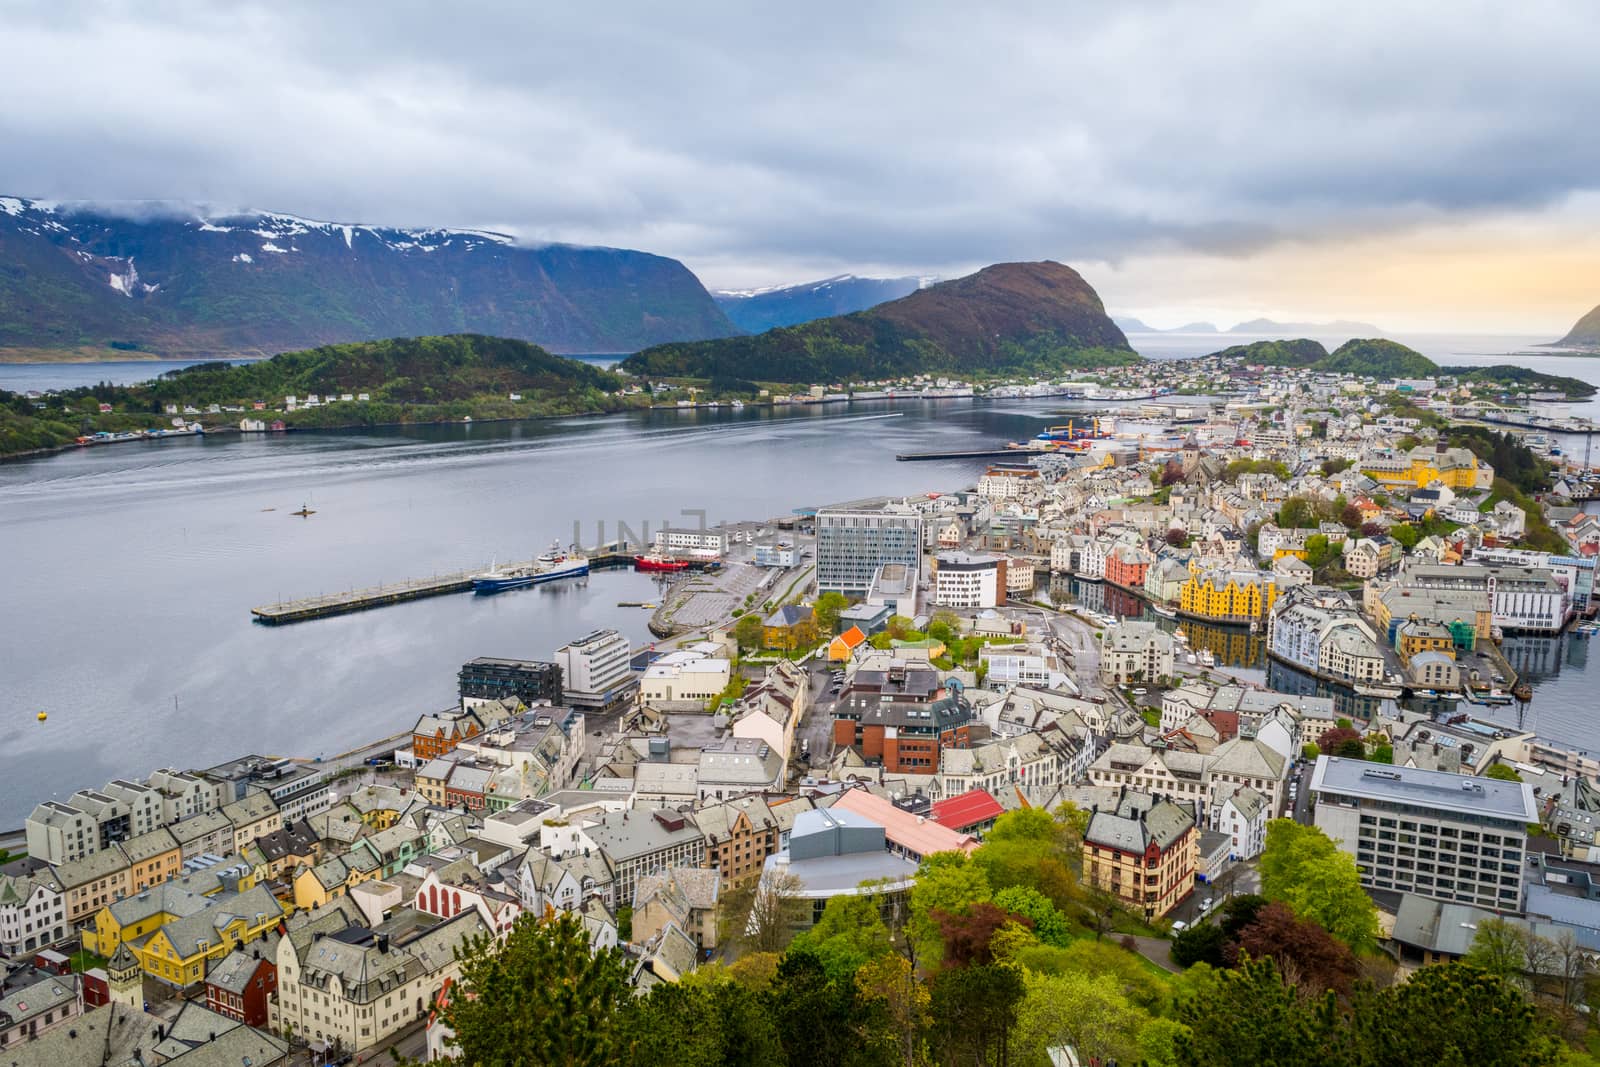 Skyline and cityscape of Alesund, Norway, on a cloudy day. Ocean bay in the background, bright houses and architecture in the foreground. Aerial view. Travel and tourism in Norway